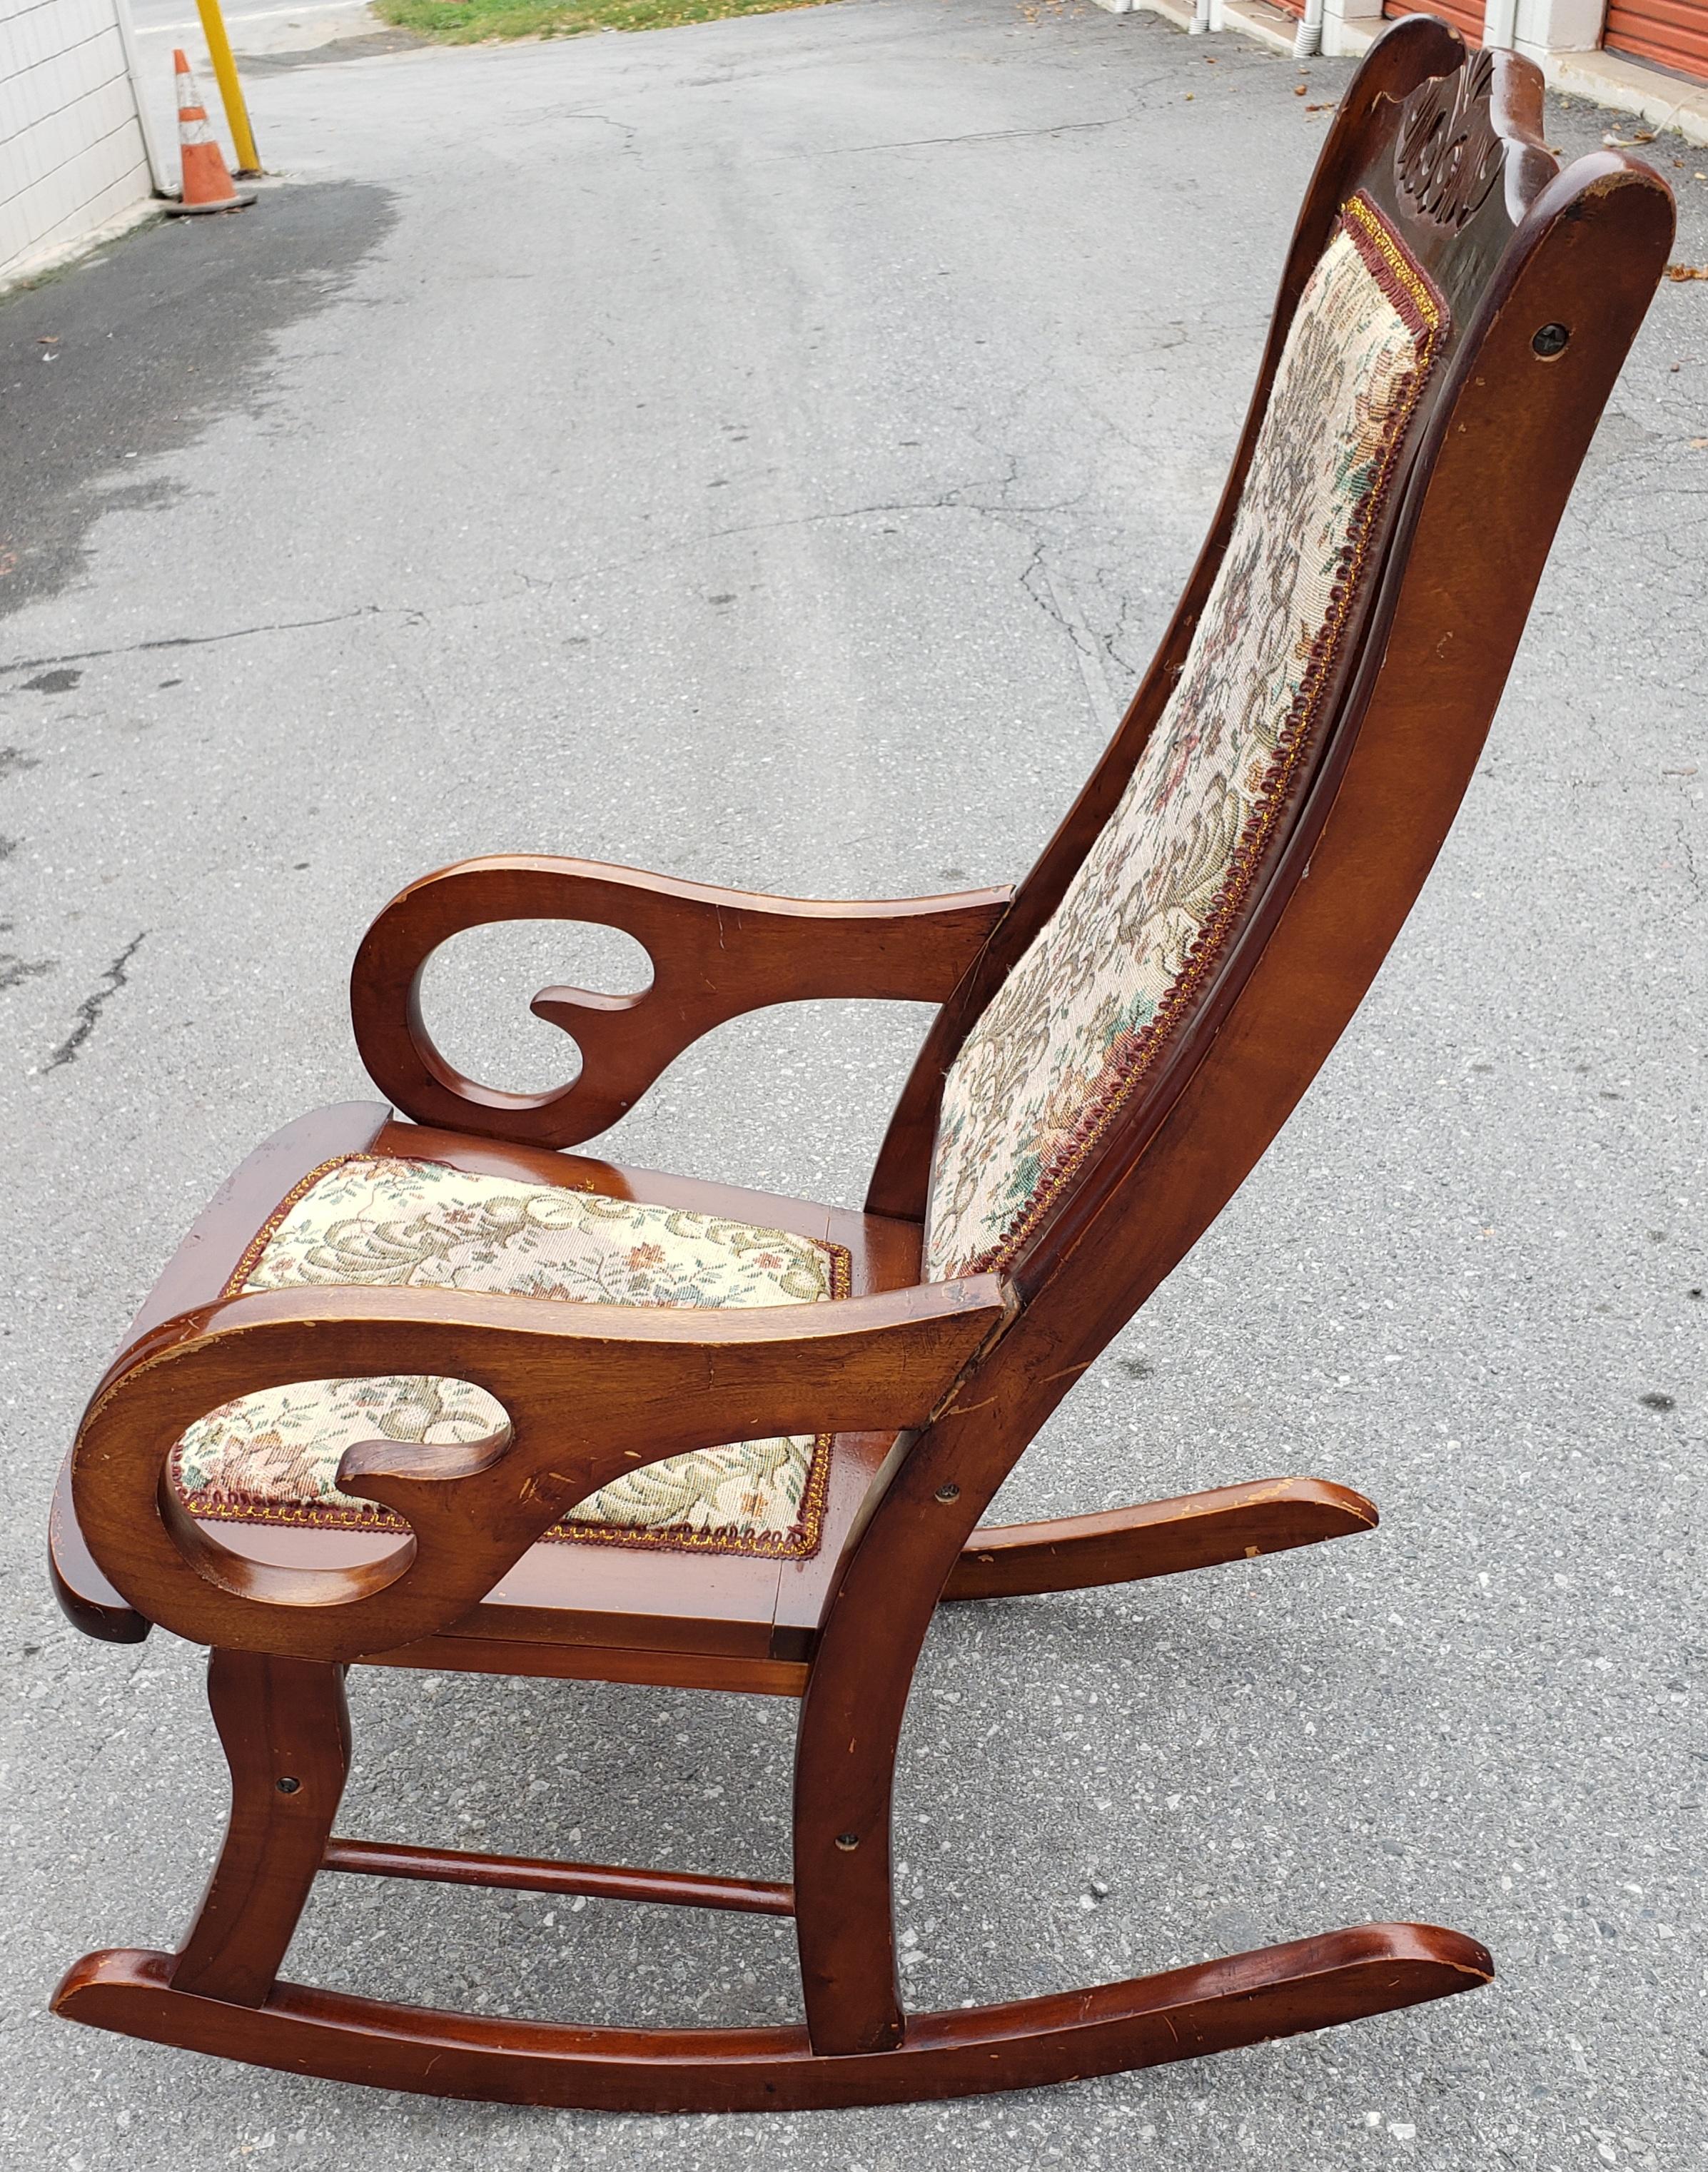 Antique Biedermeier style rocking chair, Mahogany With Needle Point Upholstery Circa 1910s. Good antique condition with some wear and nicks appropriate with age and use. Ams joins to back appear to have been repaired at some point but are in very